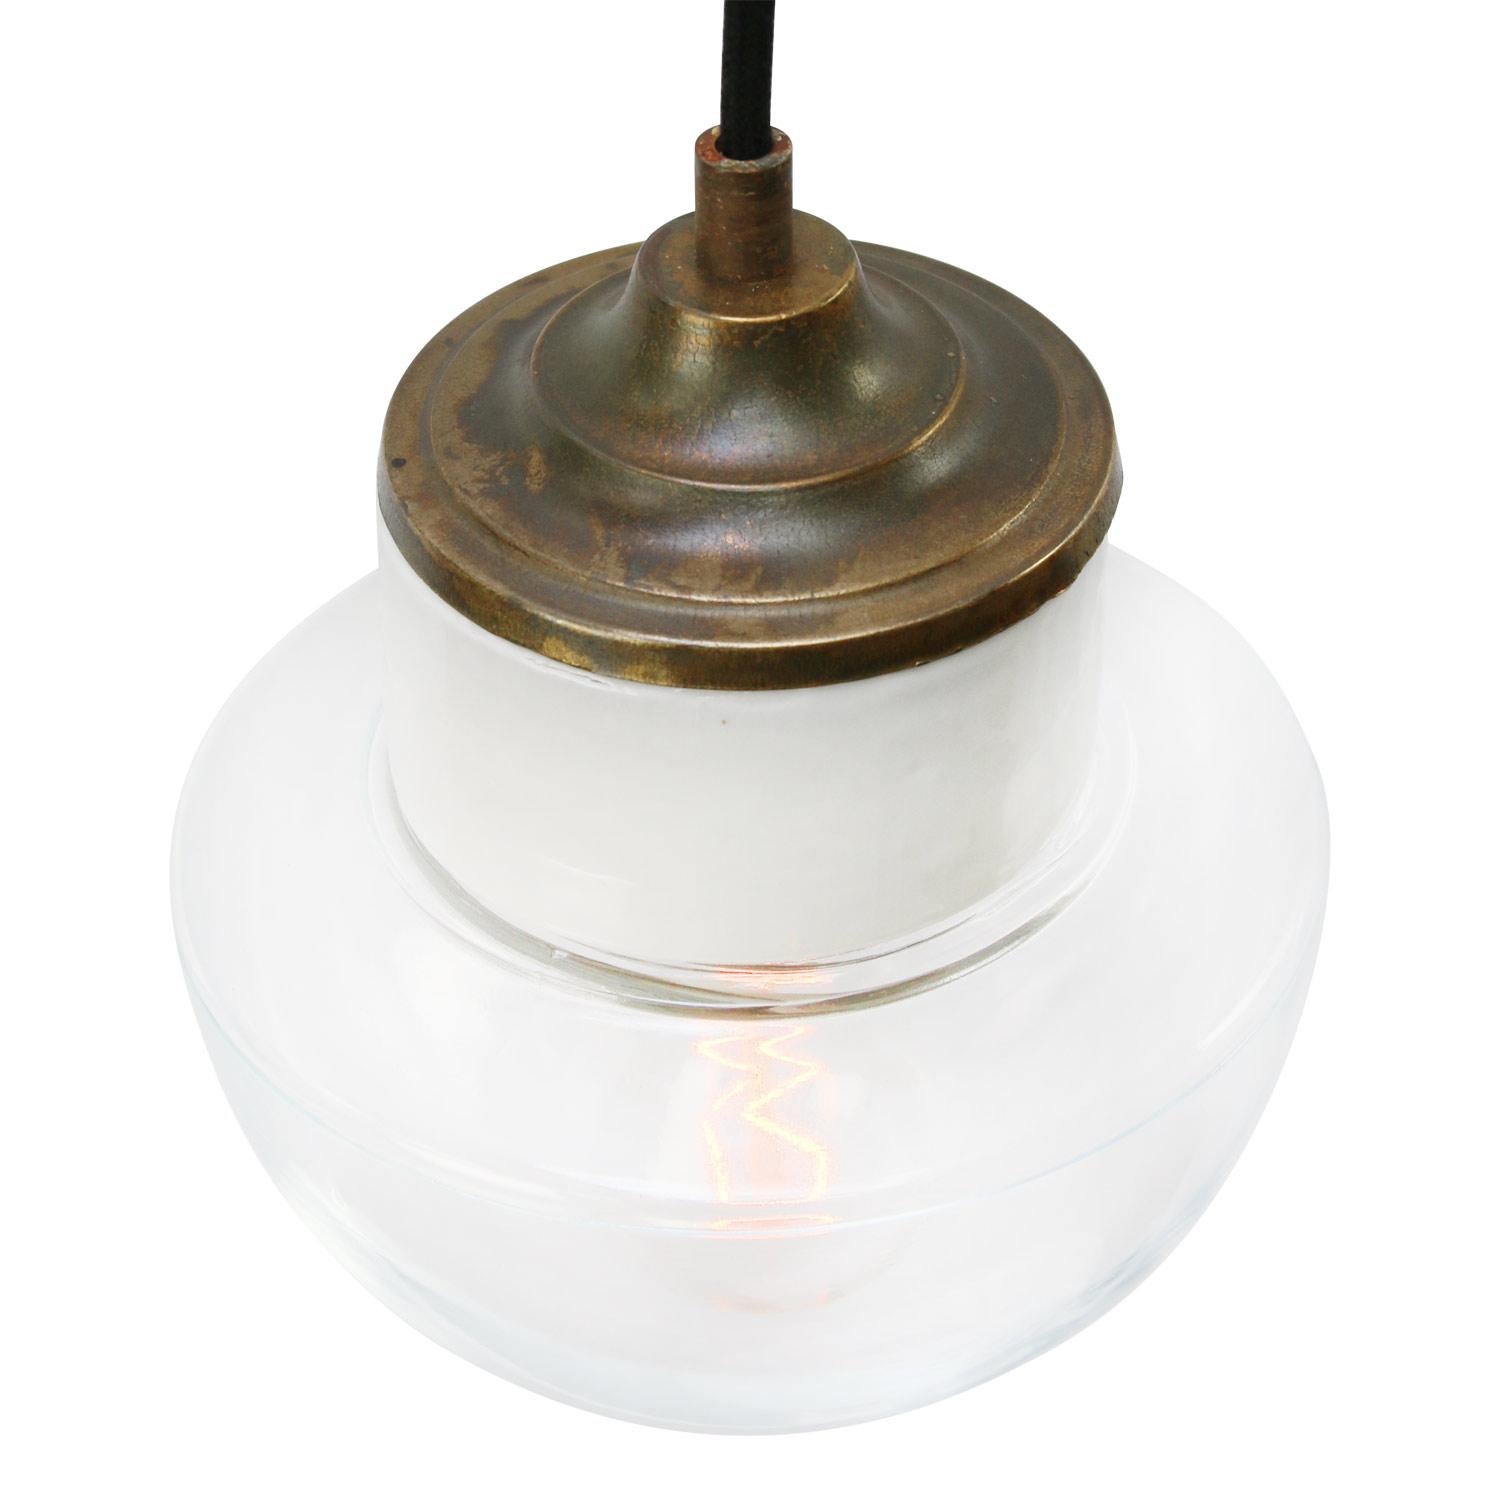 Porcelain industrial hanging lamp.
White porcelain, brass and clear glass.
2 conductors, no ground.

Weight: 2.00 kg / 4.4 lb

Priced per individual item. All lamps have been made suitable by international standards for incandescent light